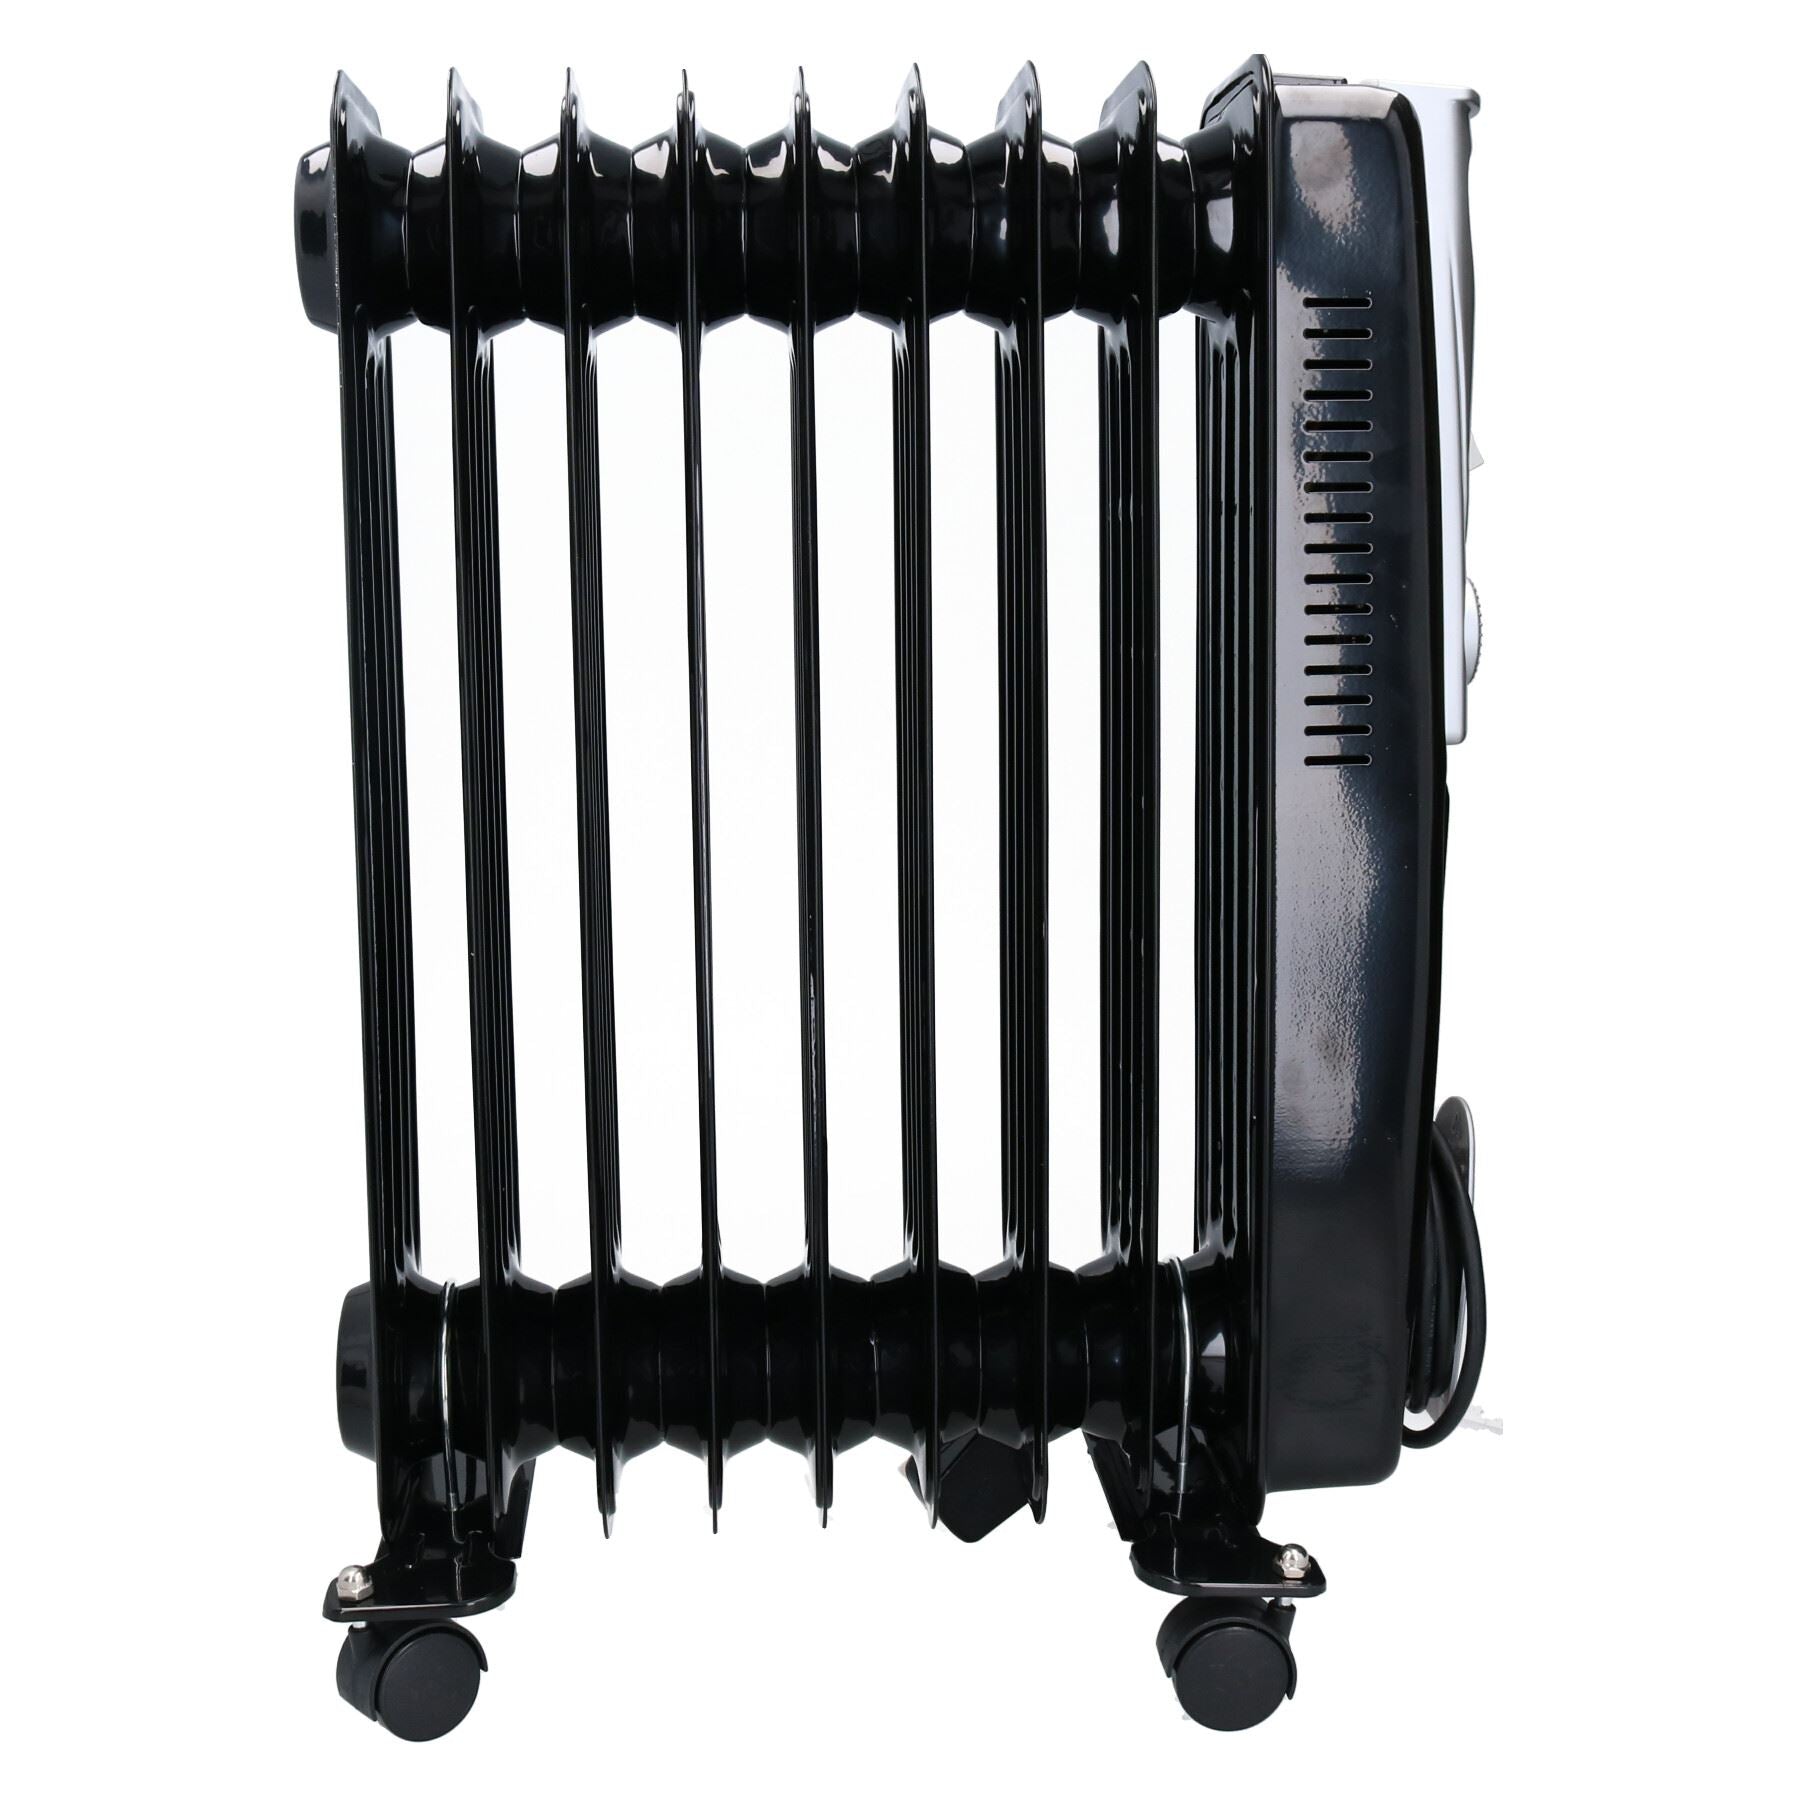 2KW 9 Fin Slim line Oil Filled Radiator Heater With Adjustable Thermostat Black